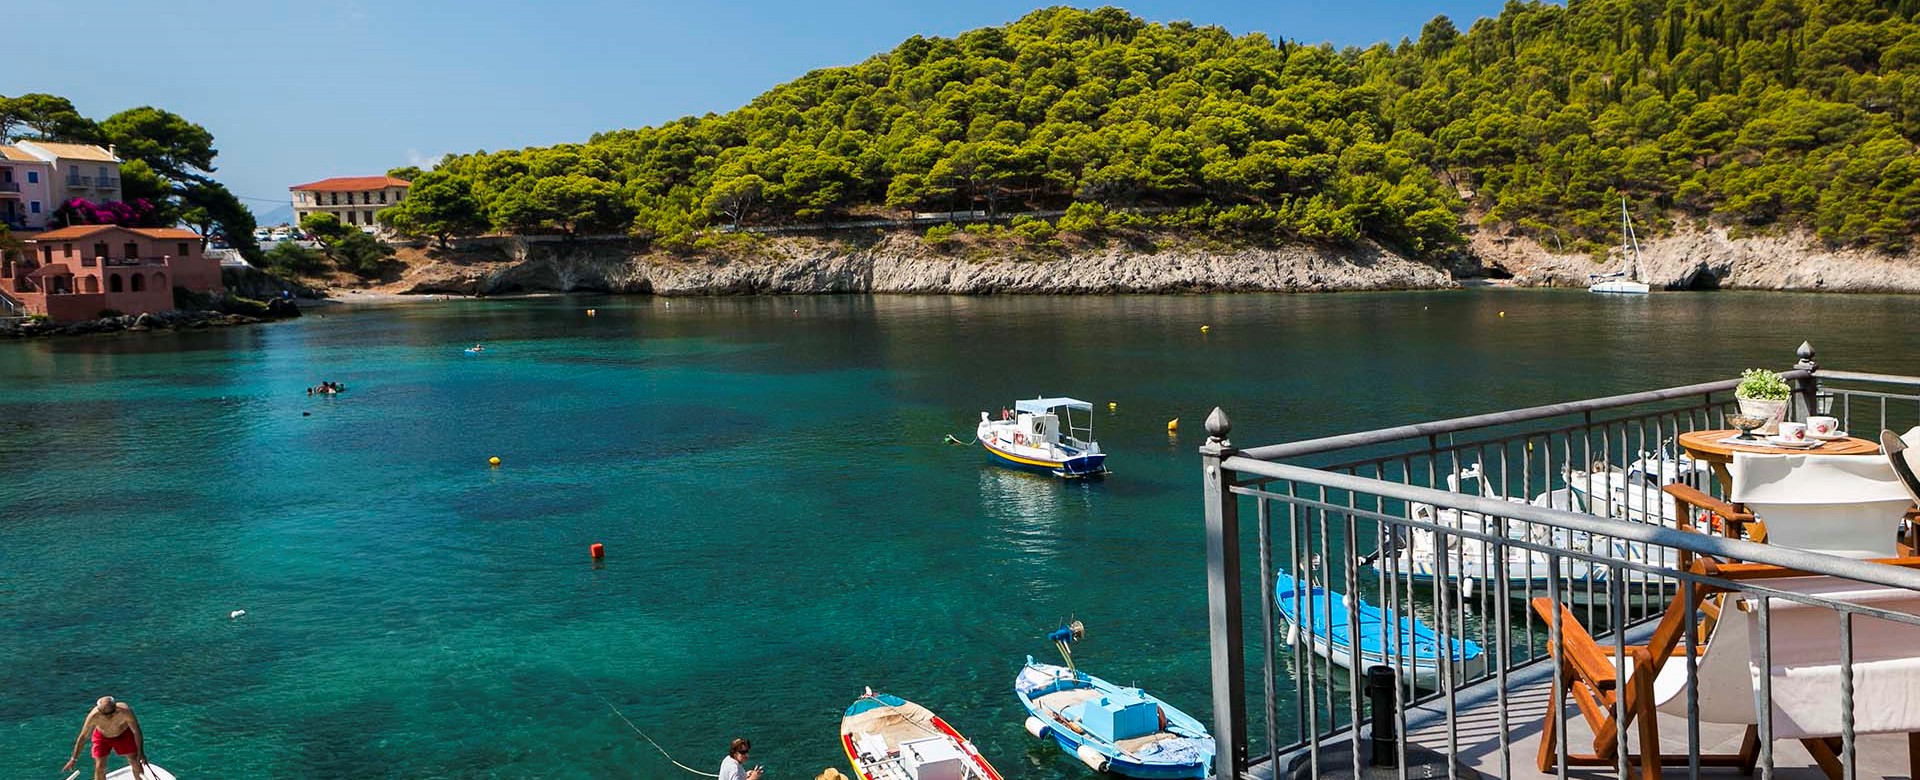 Step out of Thalassa House right onto the waterfront at Assos, Kefalonia, Greek Islands